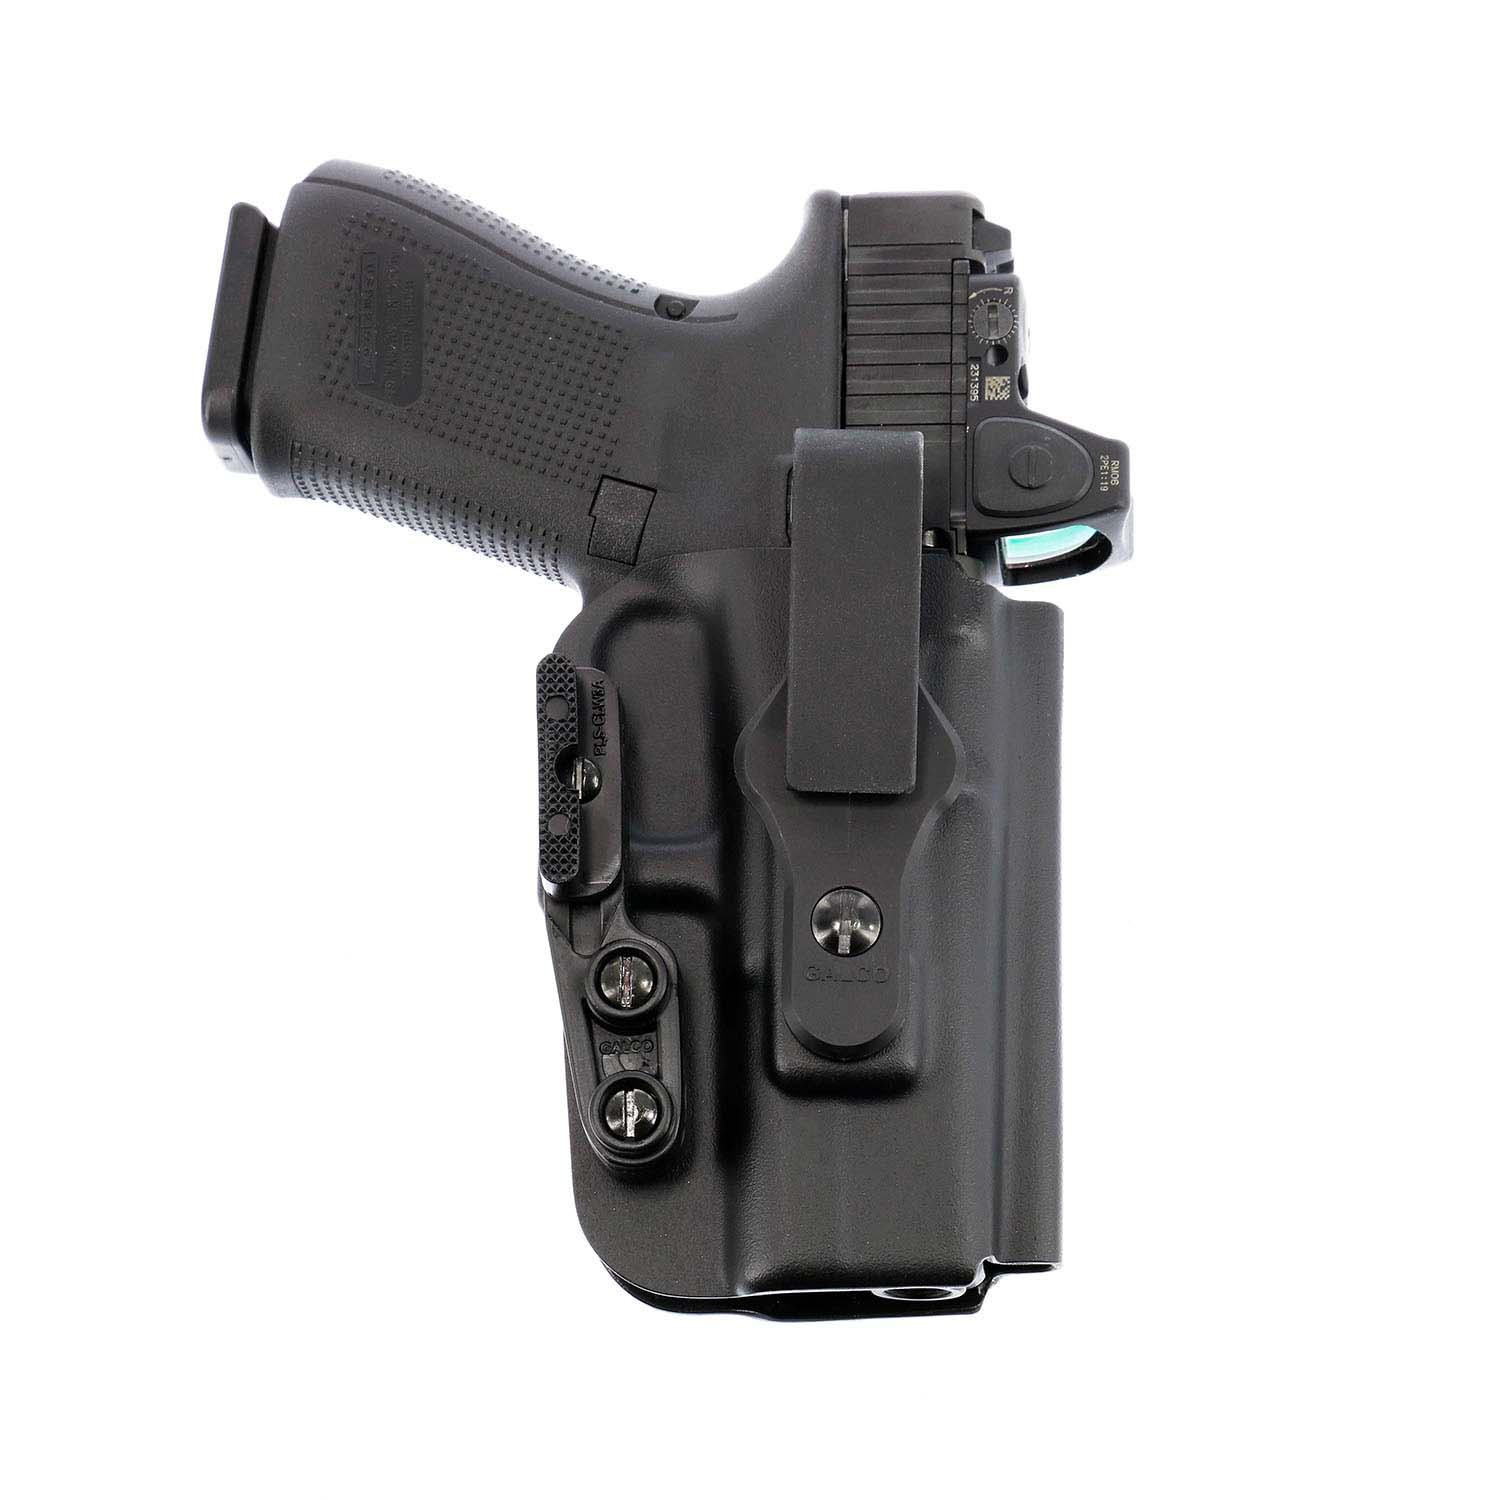 Galco TR158 Triton Kydex IWB Holster Right Hand S&w J Frame 340pd Taurus 85 2" for sale online 